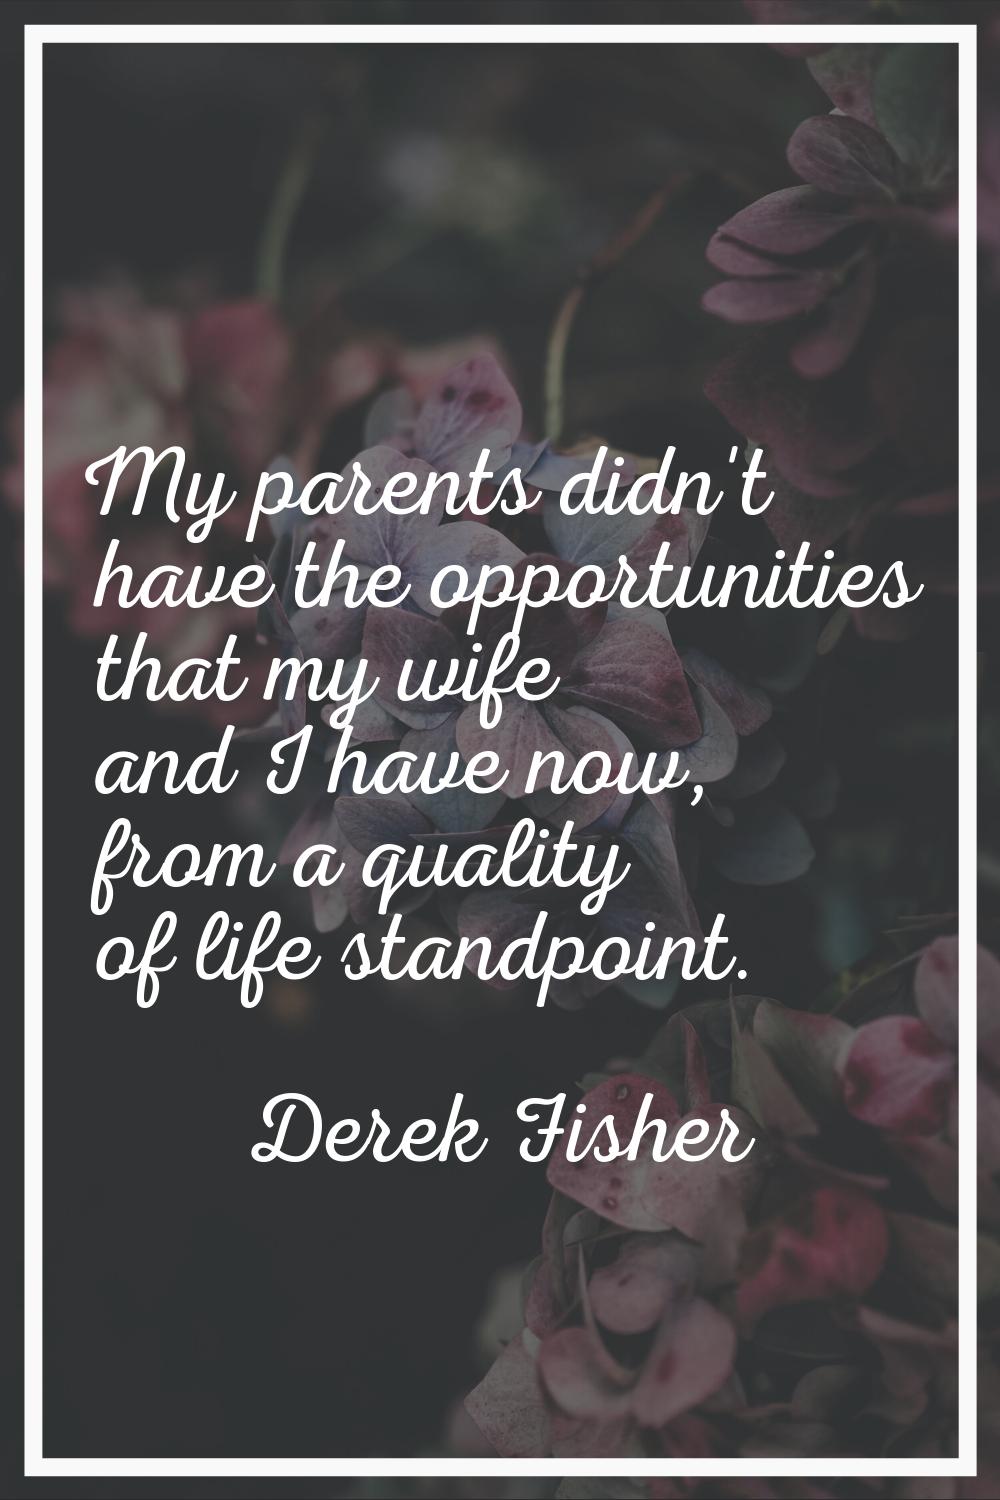 My parents didn't have the opportunities that my wife and I have now, from a quality of life standp